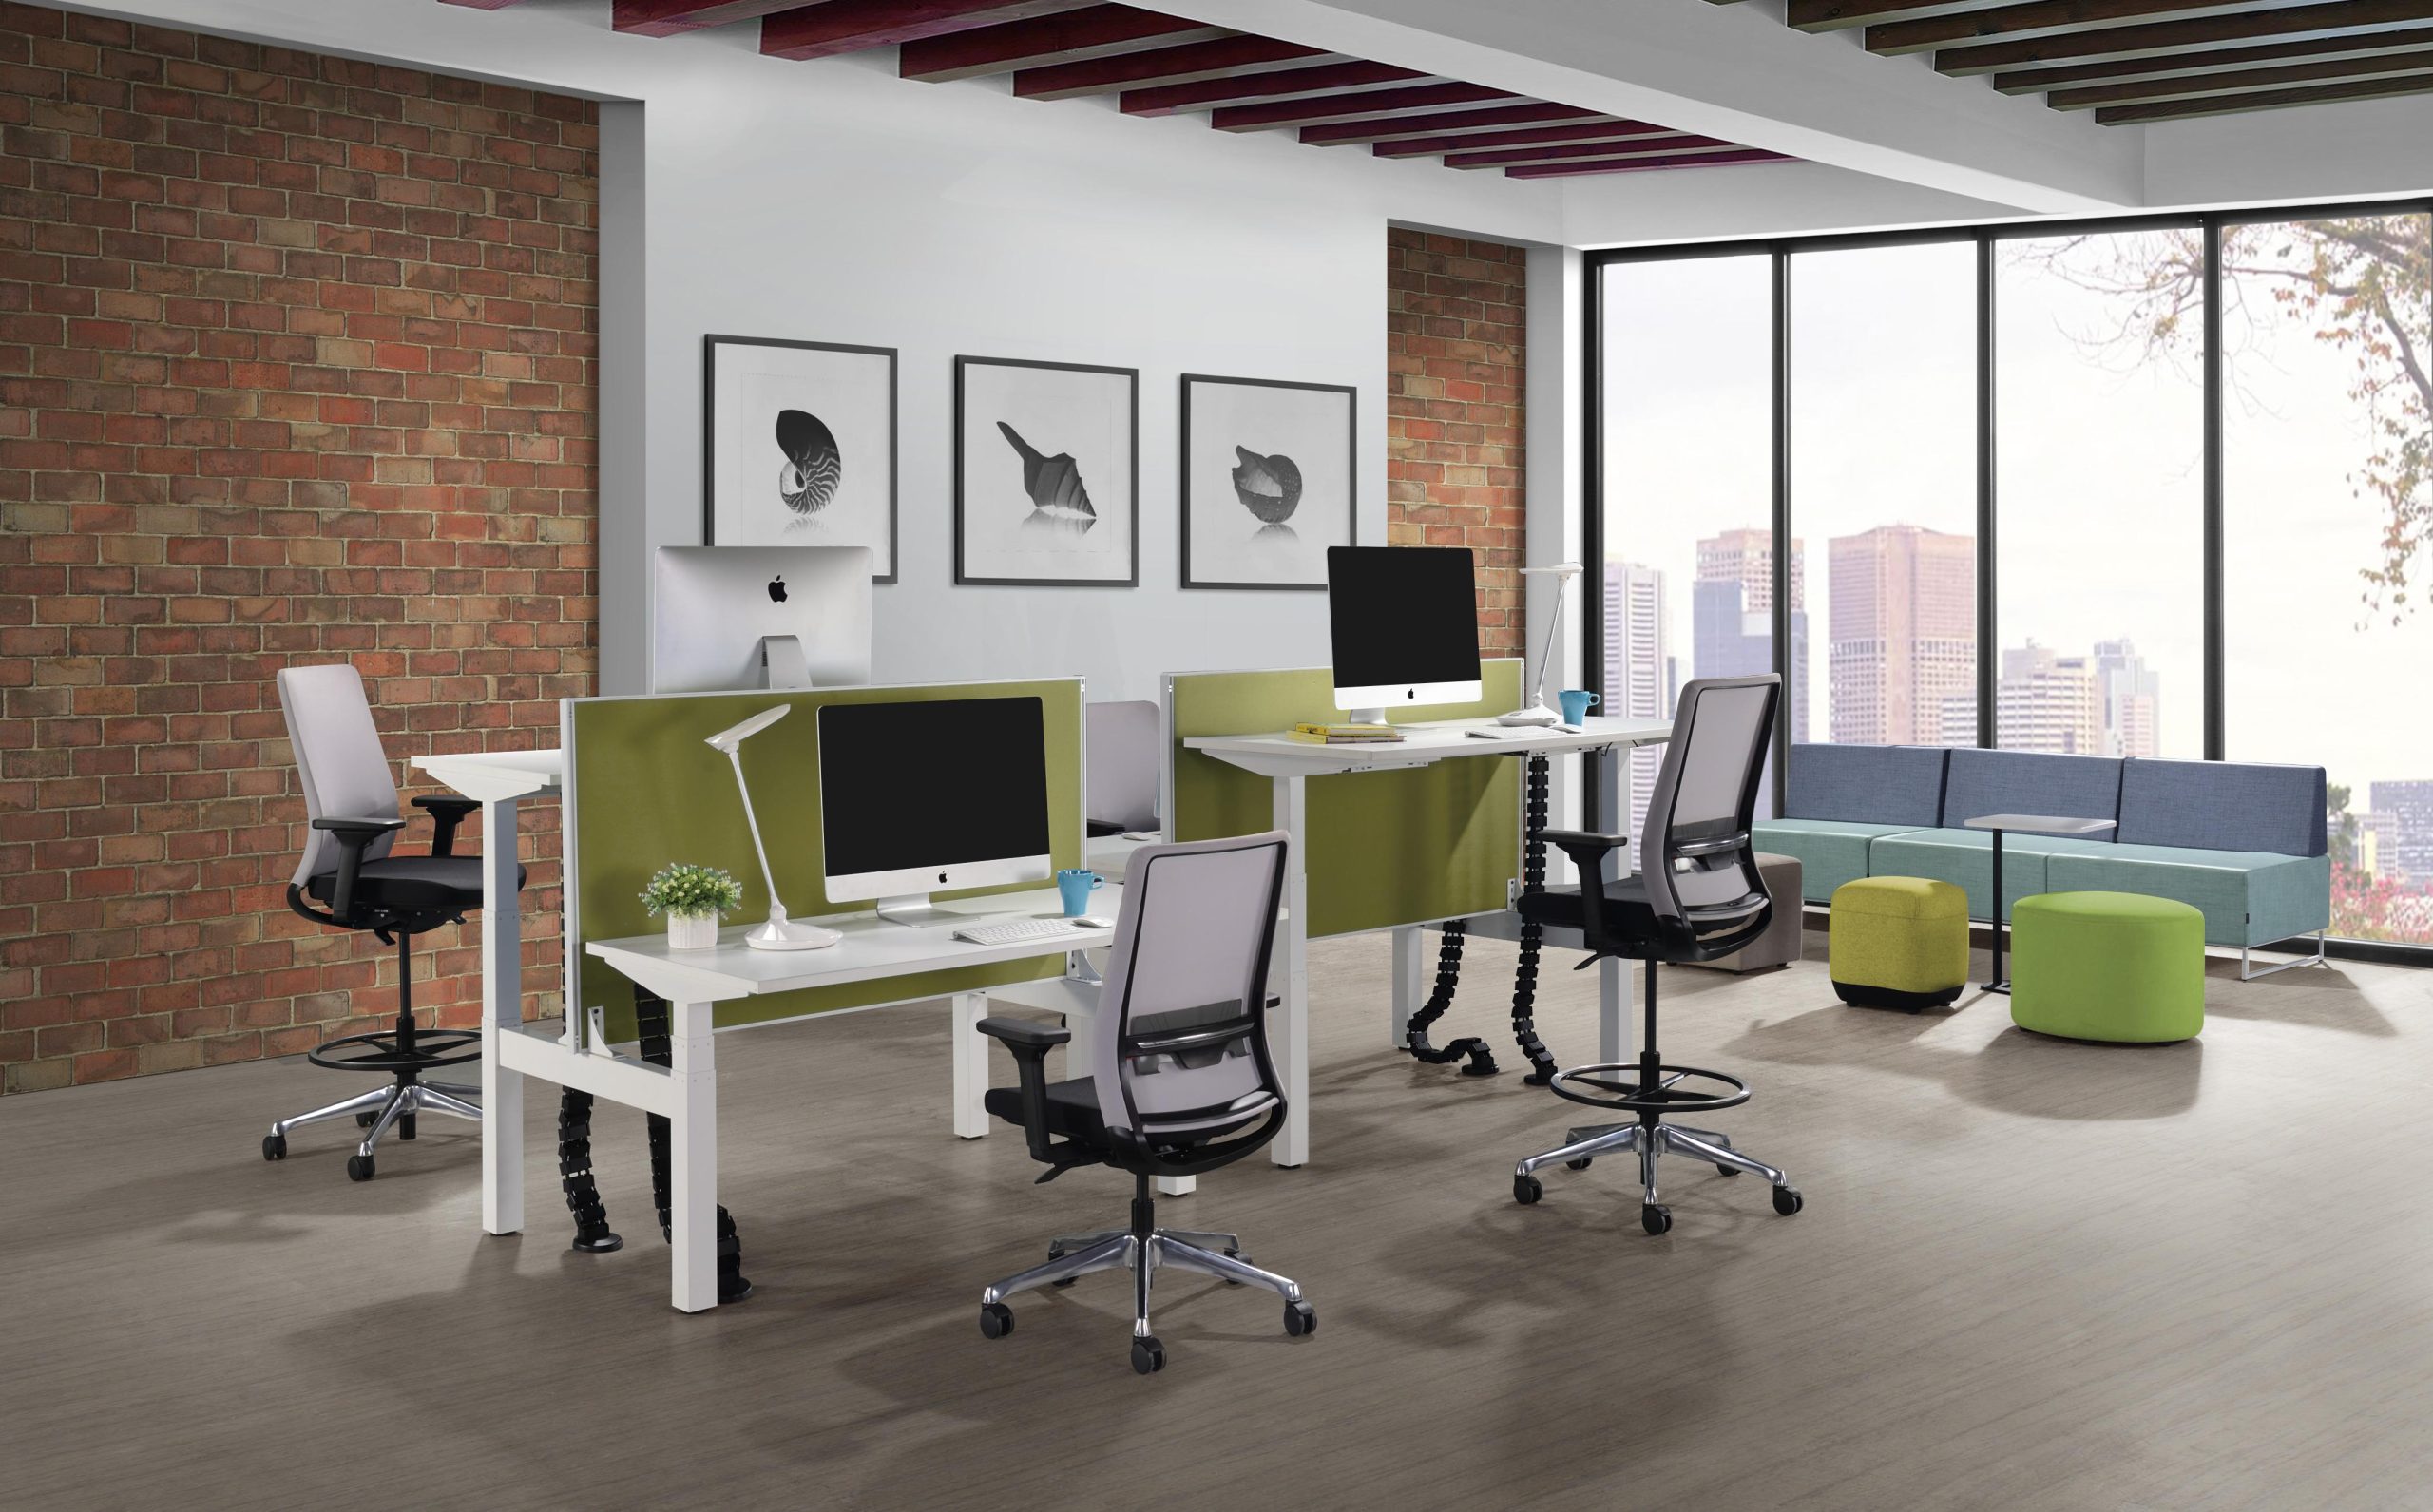 Choosing a Comfortable Office Chair from Office Chair Manufacturer in Malaysia | Benithem® | Why Choose a Good Office Chair Manufacturer | Vegan Leather | Malaysia